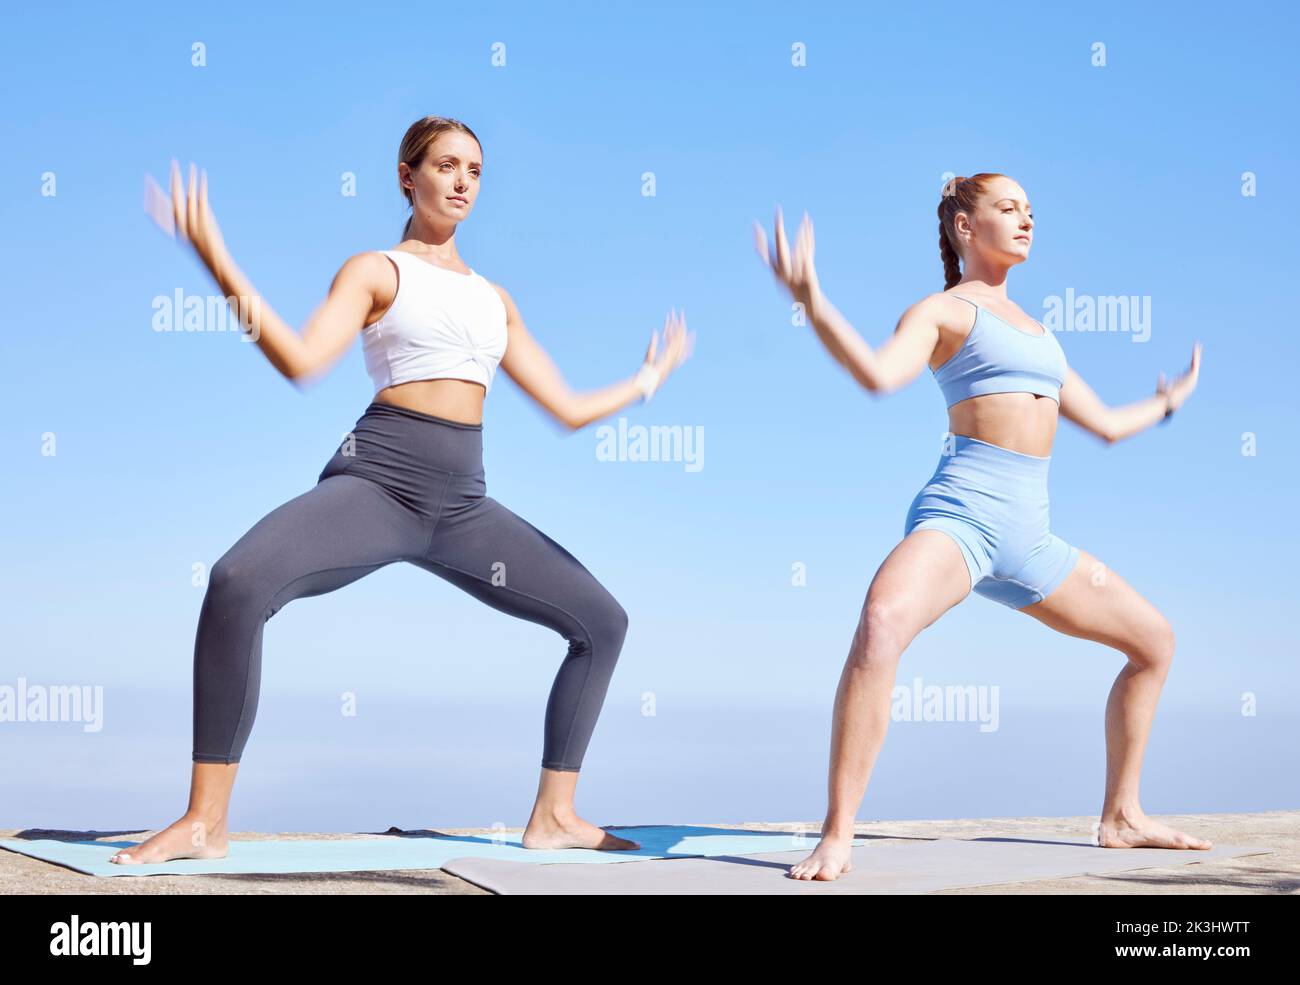 Young Fit Women on a Yoga Pilates Group Class in Gym. they Stretch, Stay in  Asana Poses in Sport Outfit. Daylight Stock Image - Image of poses, adult:  151926943